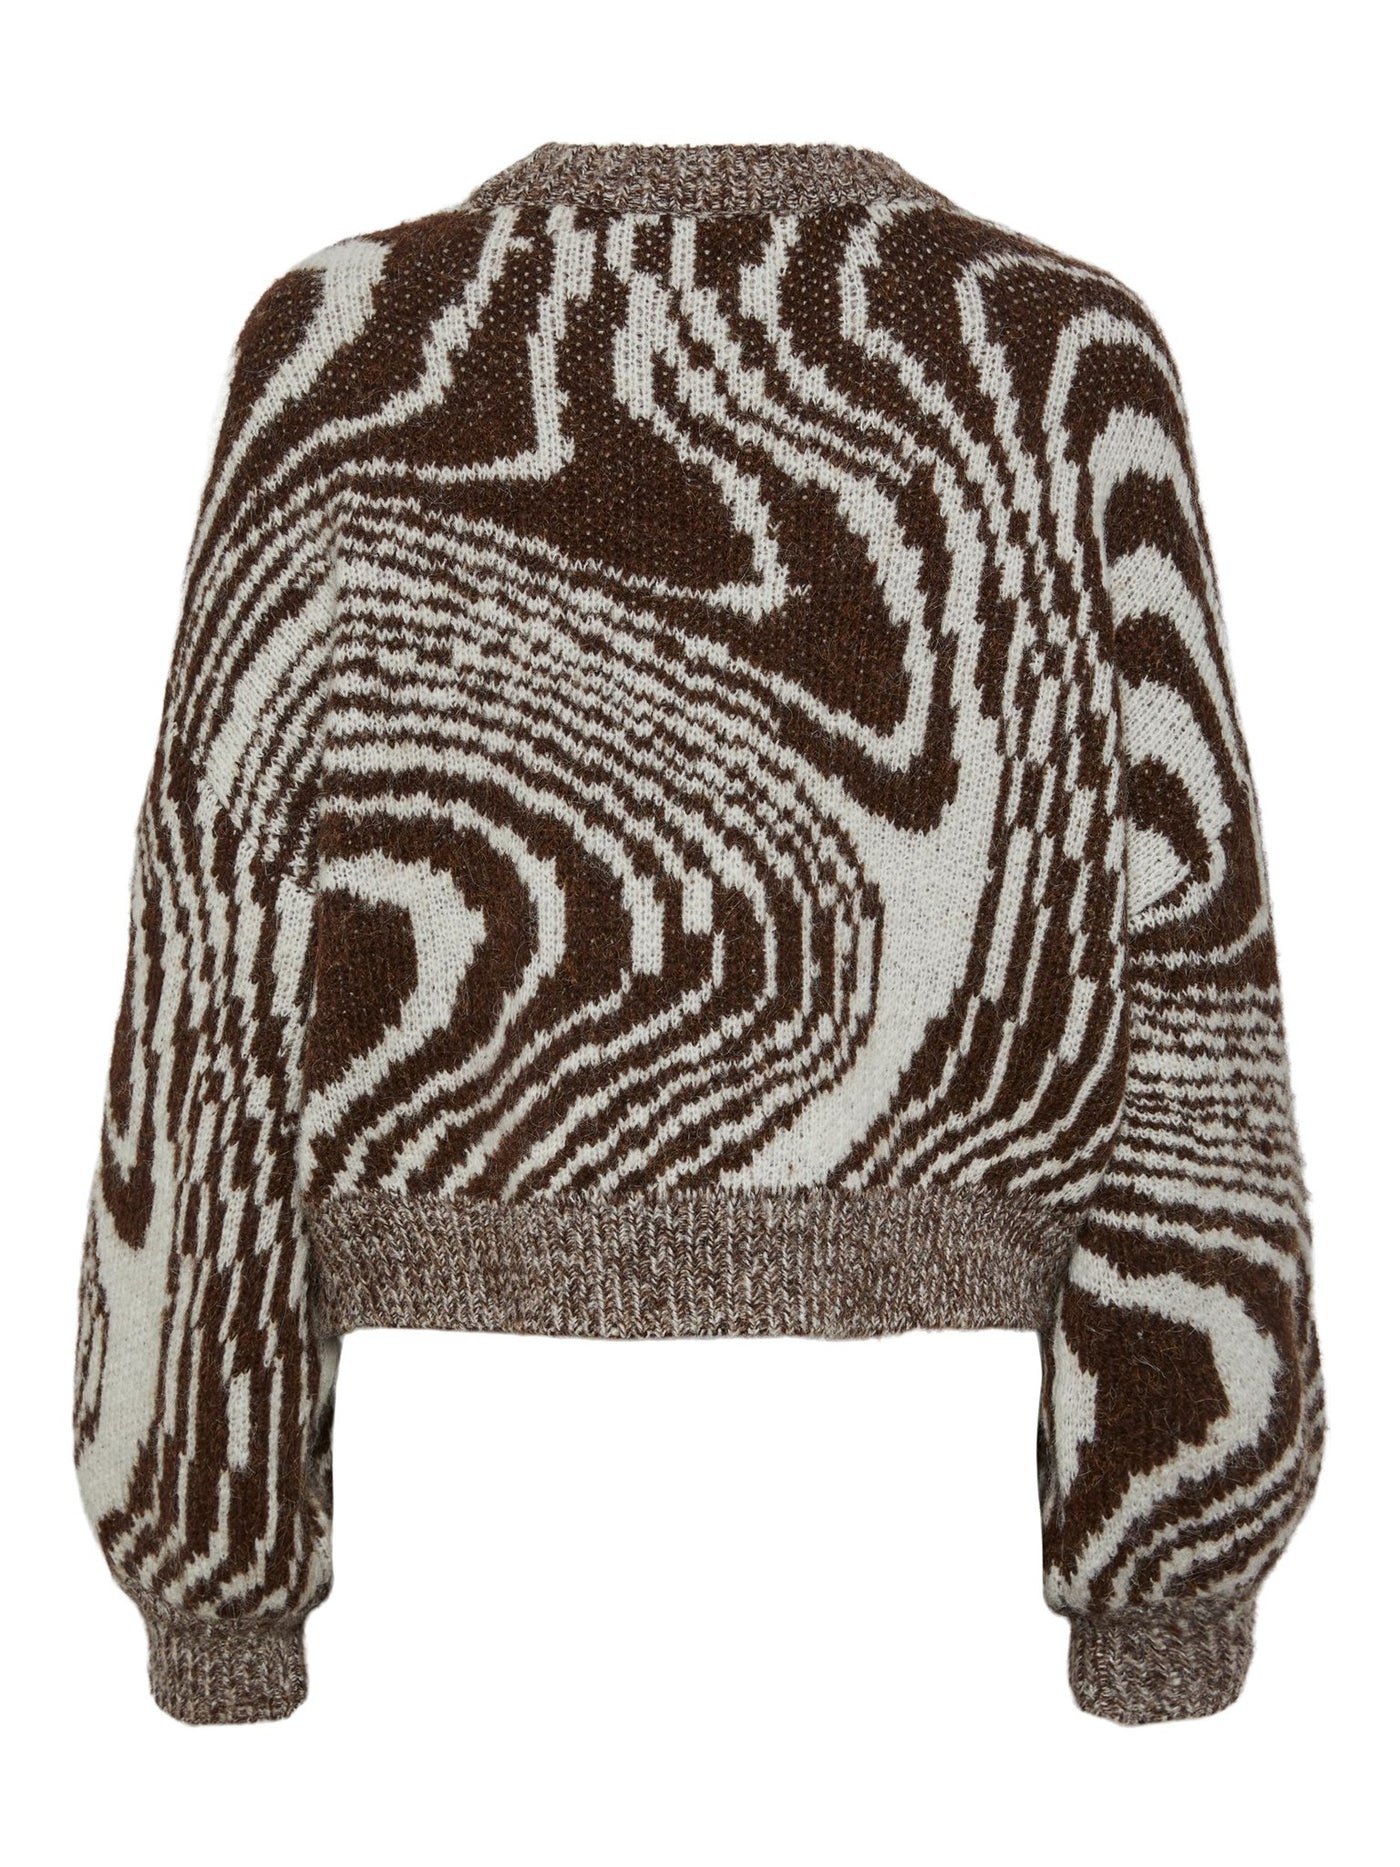 Mara O-Neck Knit - Chicory Coffee - PIECES - Red 5